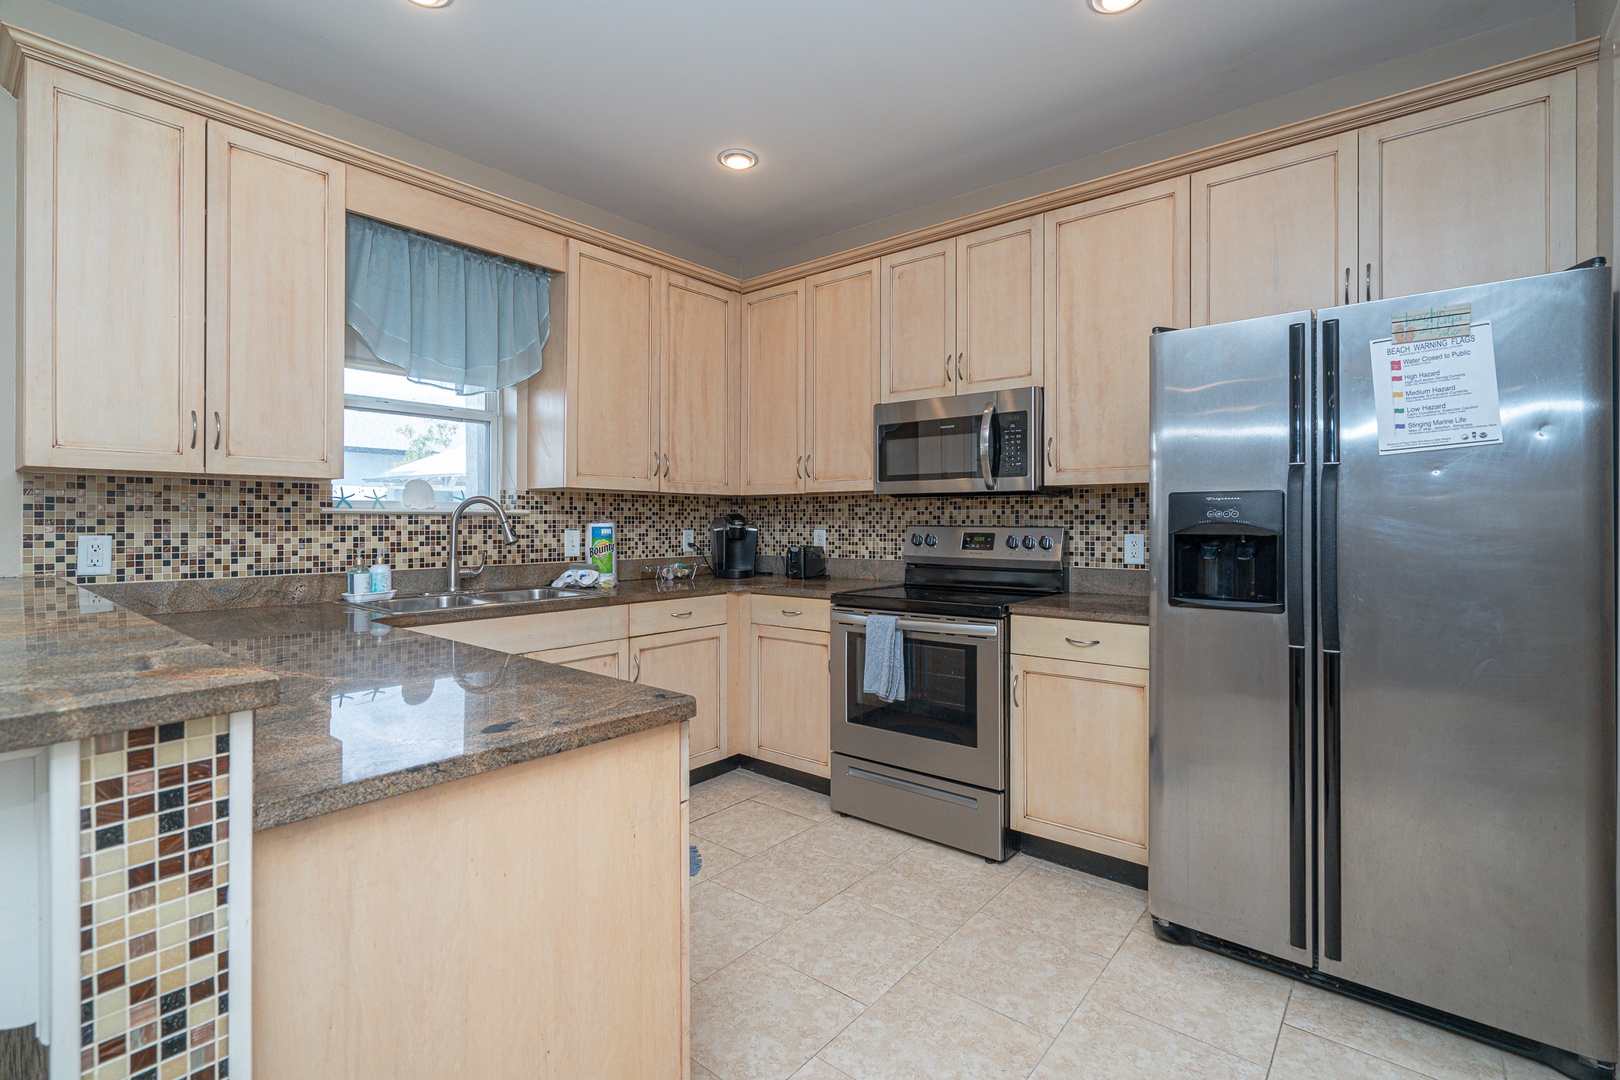 The sleek, updated kitchen offers ample space & all the comforts of home